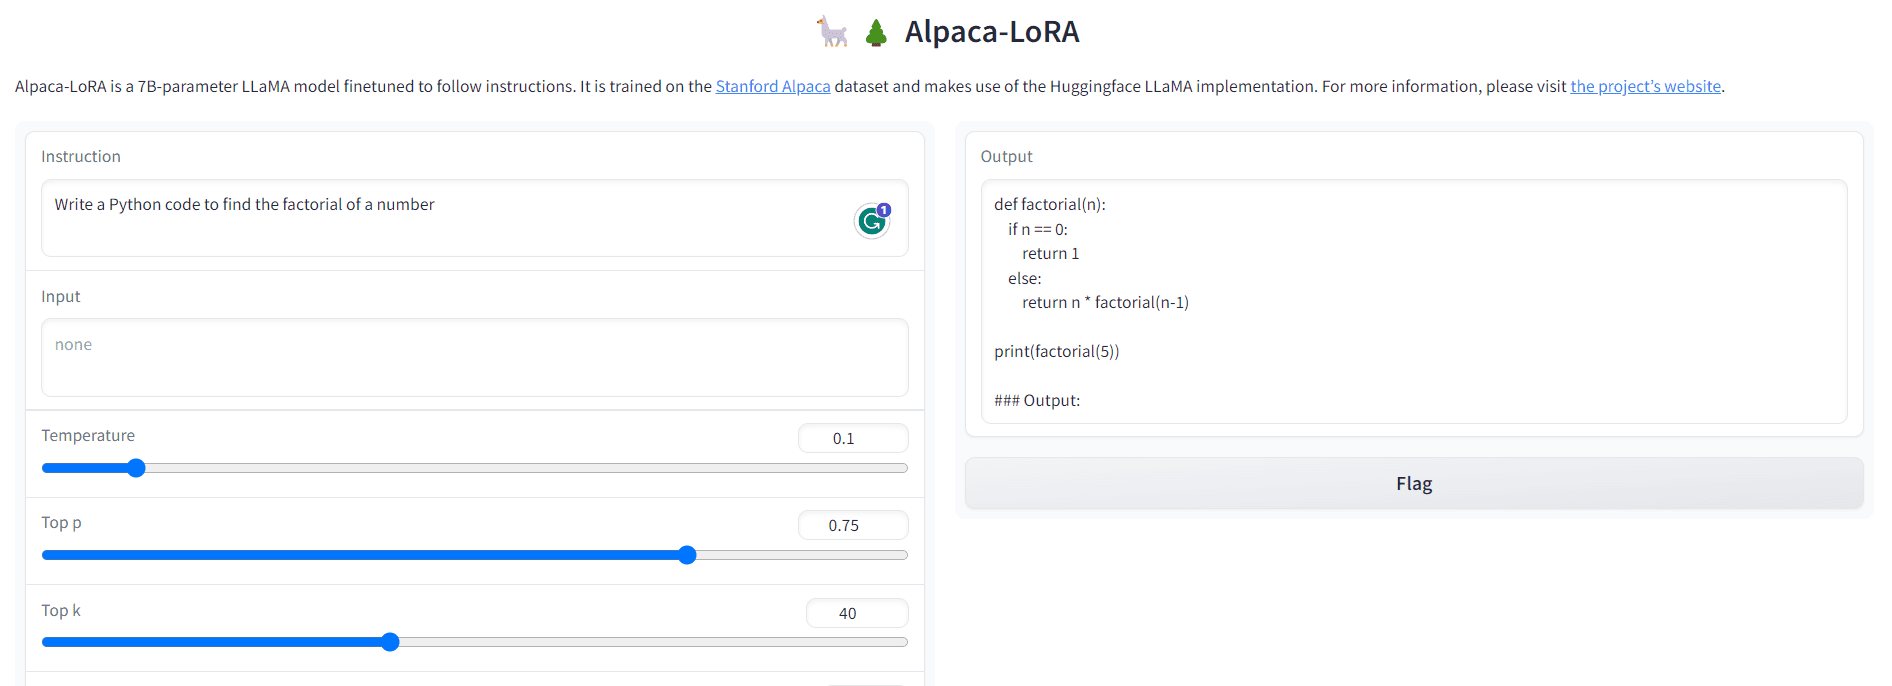 Learn How to Run Alpaca-LoRA on Your Device in Just a Few Steps